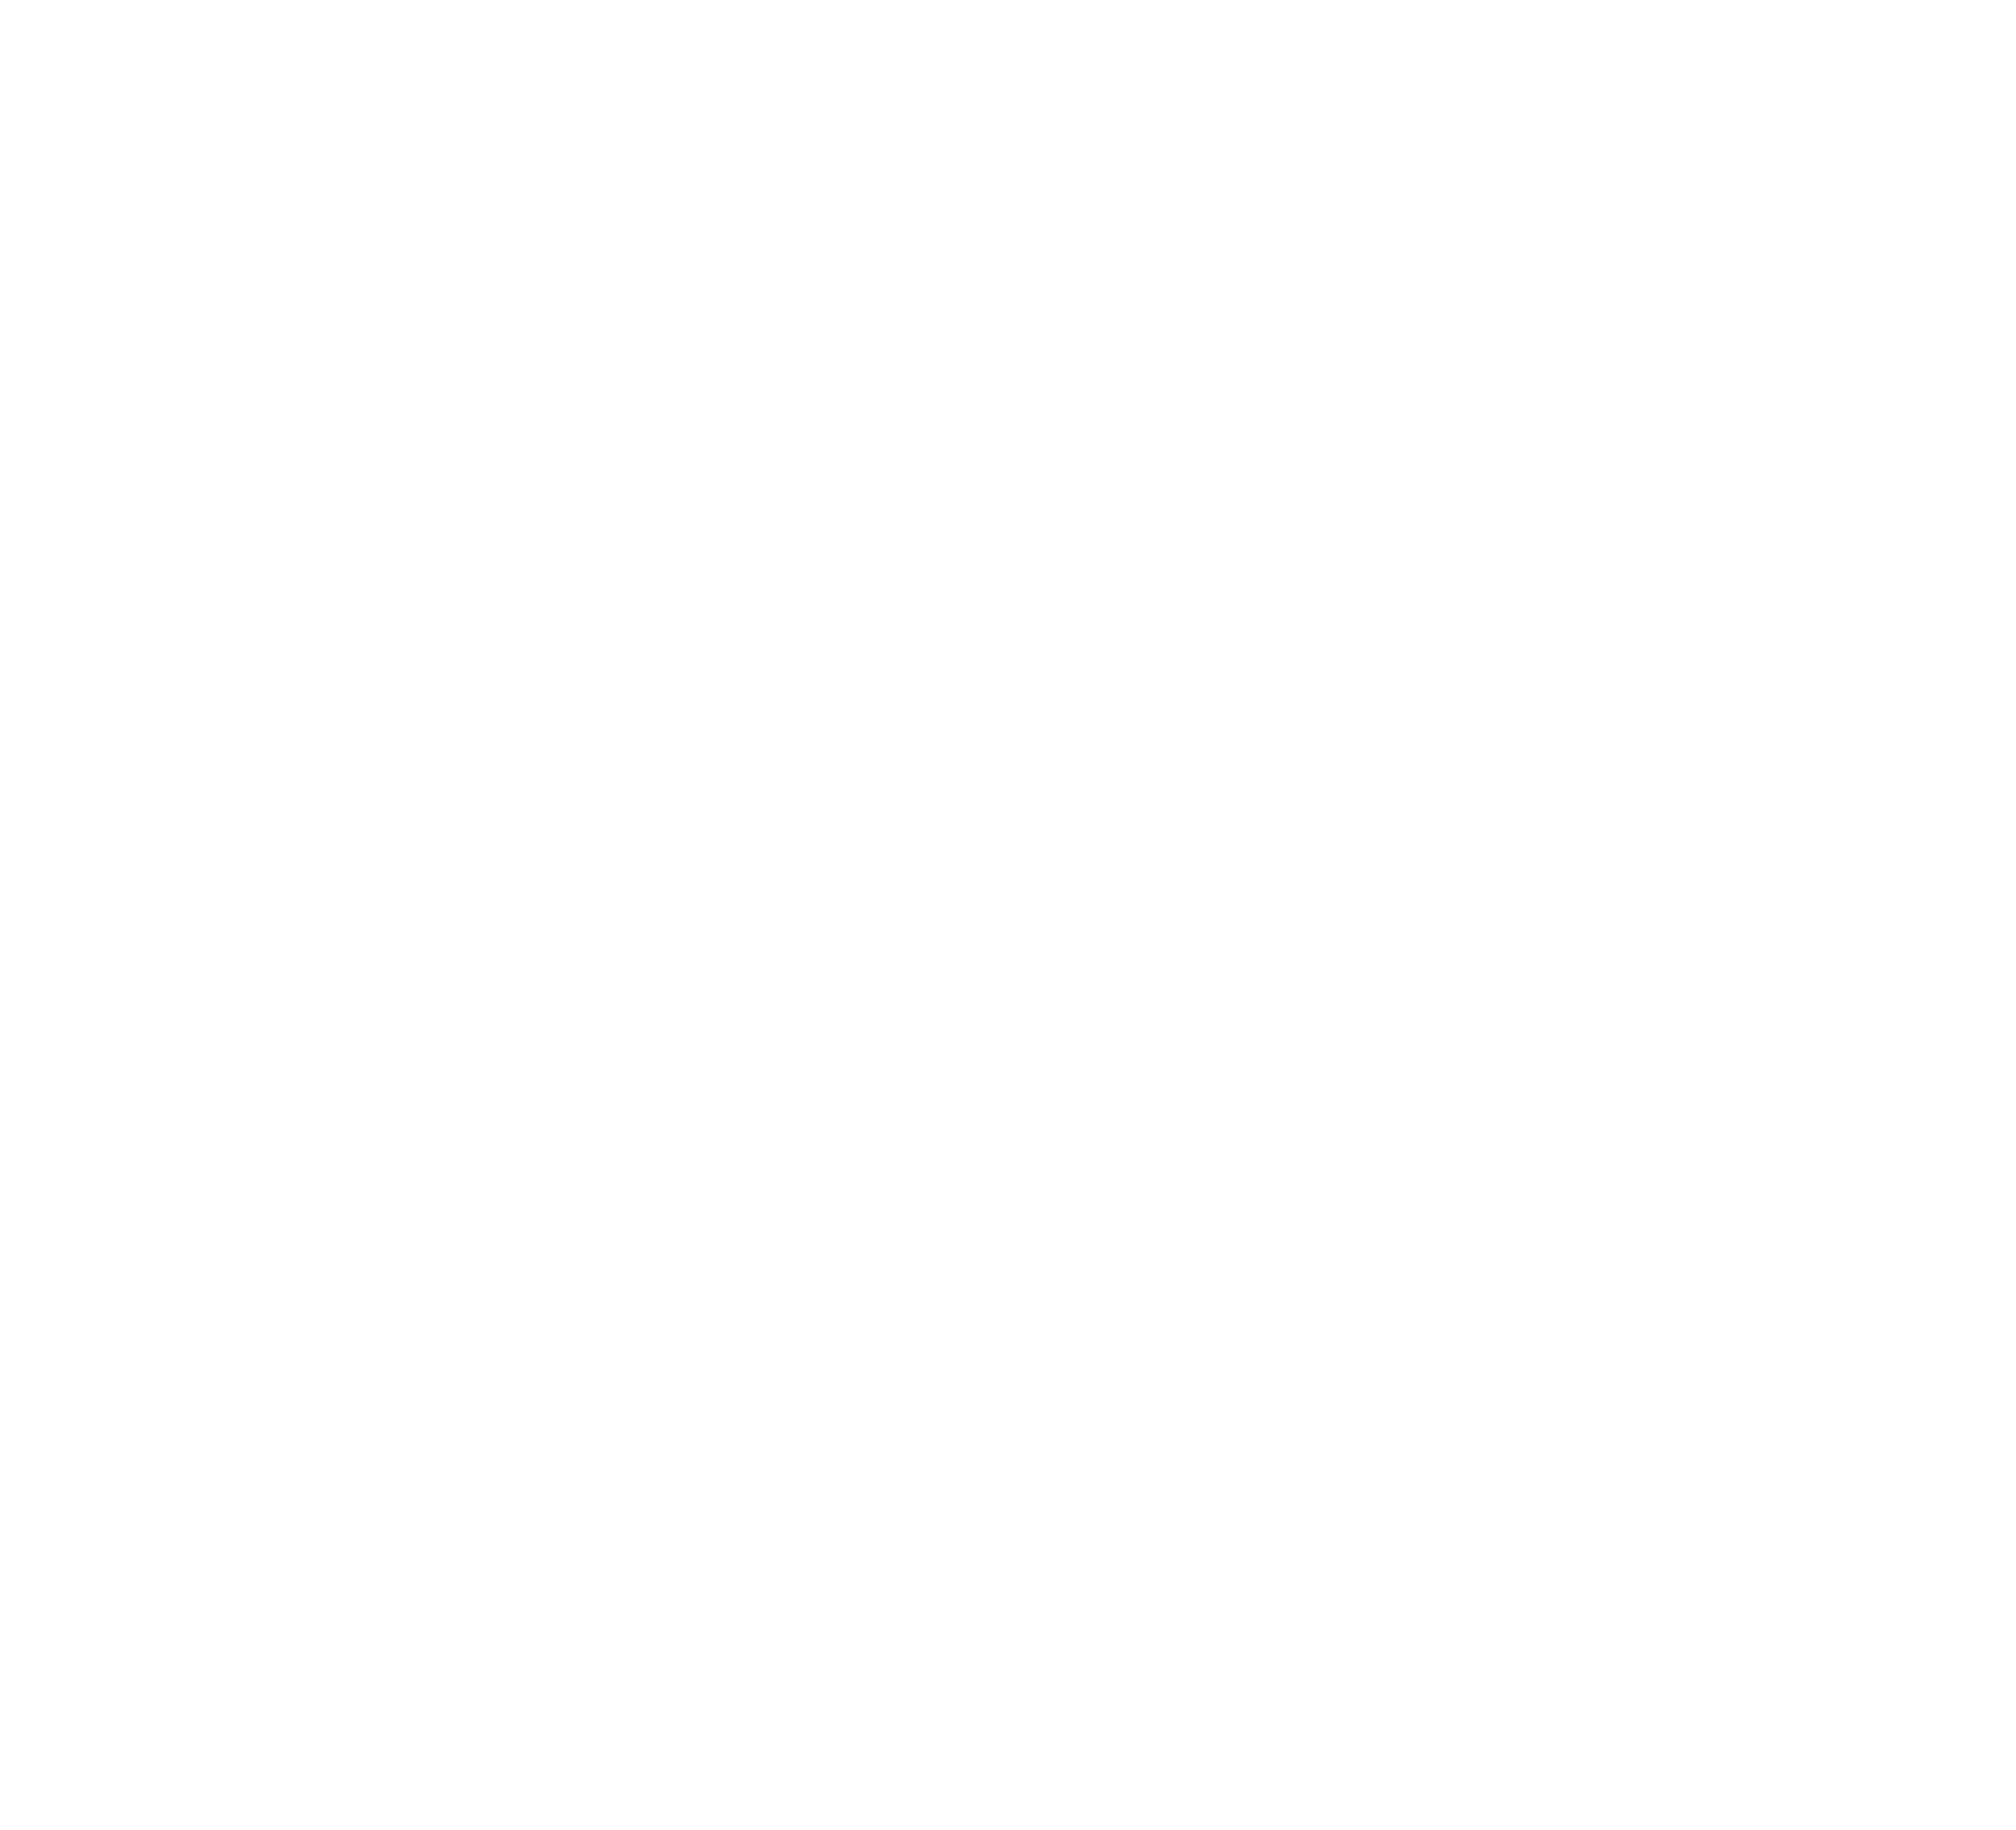 Beaudry logo